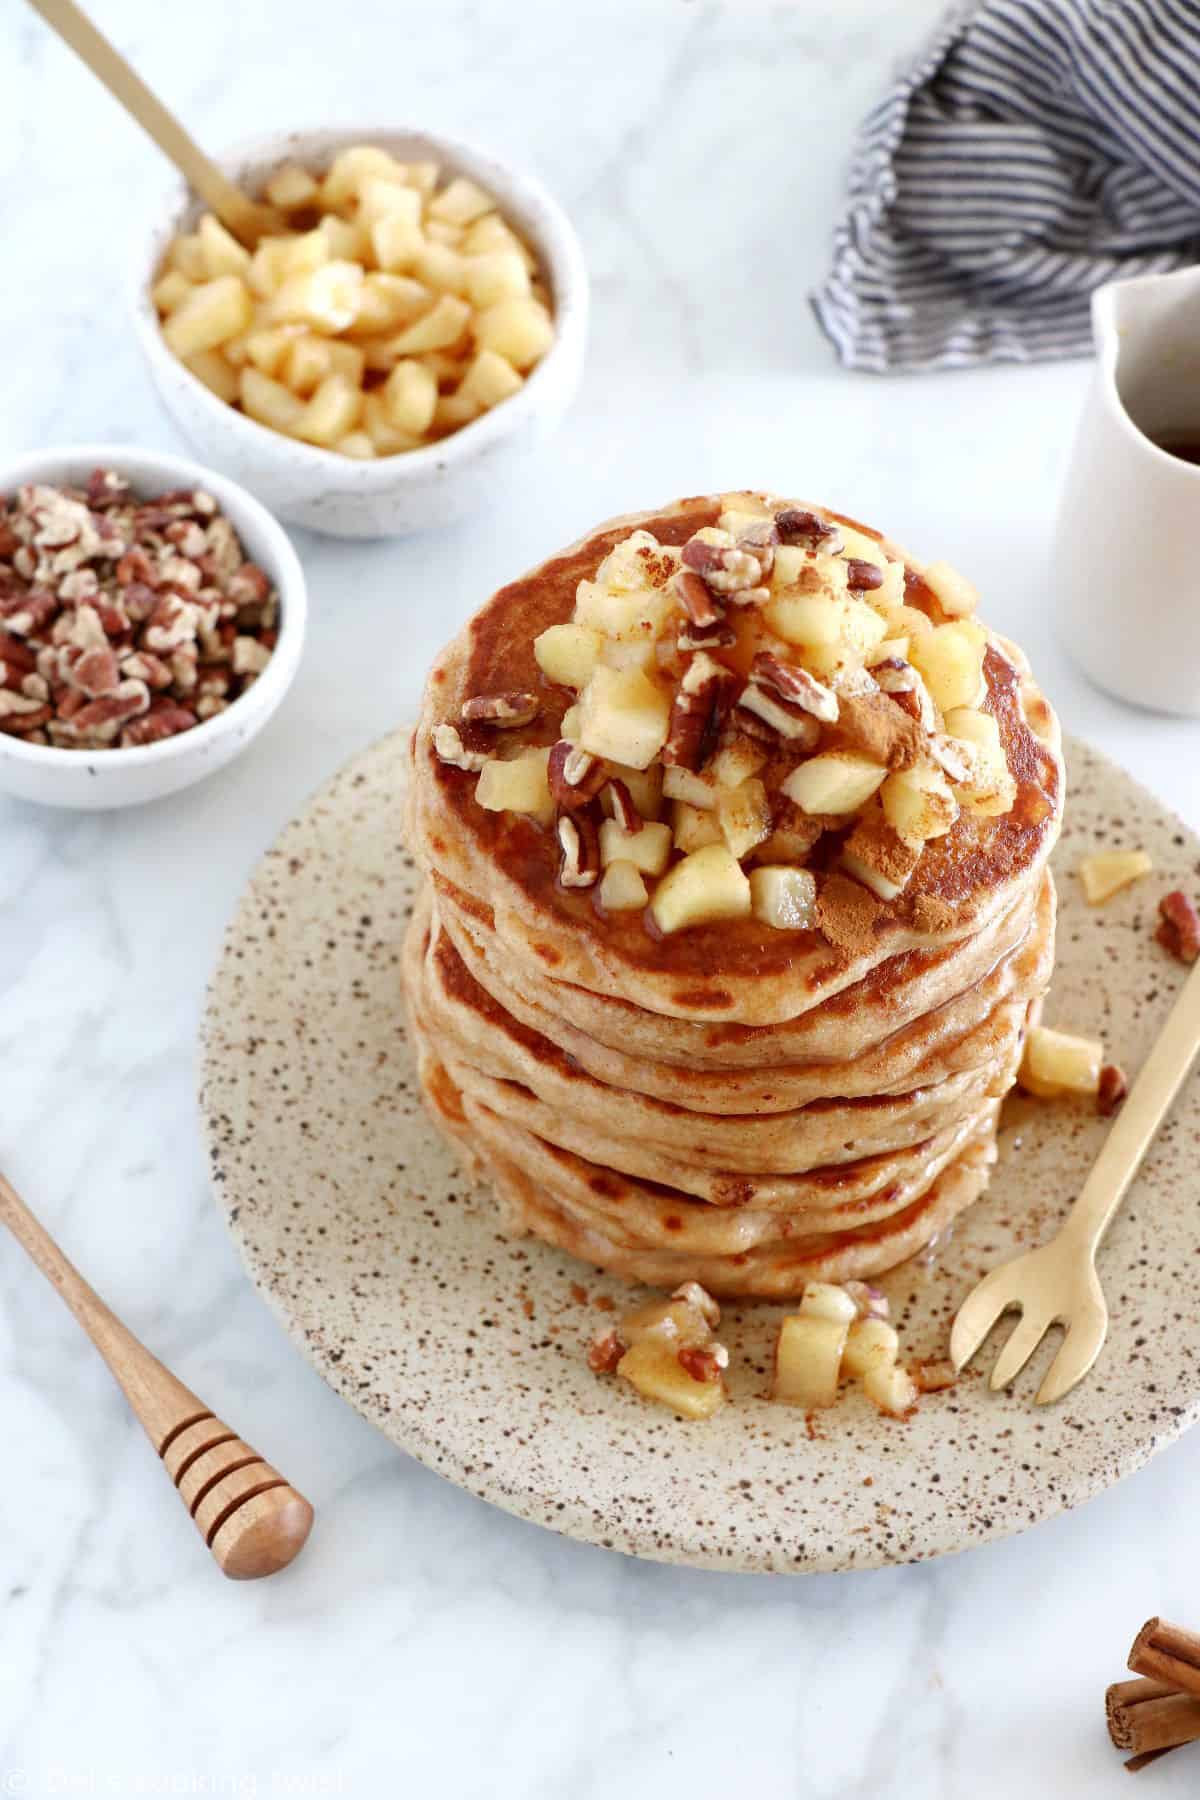 Healthy apple pancakes are prepared with shredded apples and a mix of whole wheat flour and almond flour to make them more nutritious.